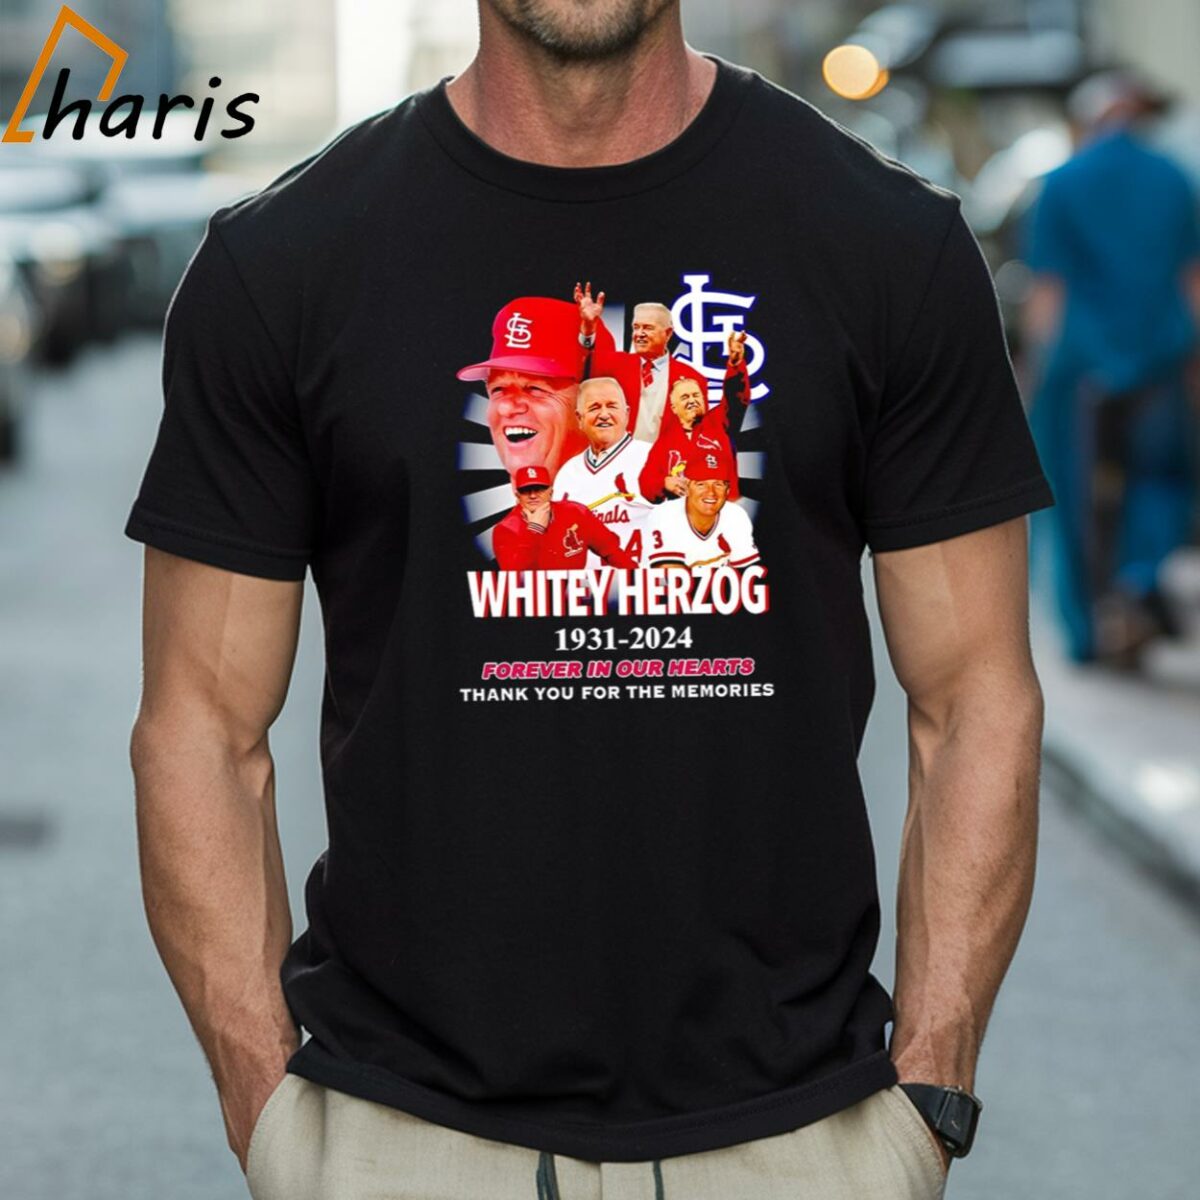 Whitey Herzog 1931-2024 Forever In Our Hearts Thank You For The Memories T-shirt